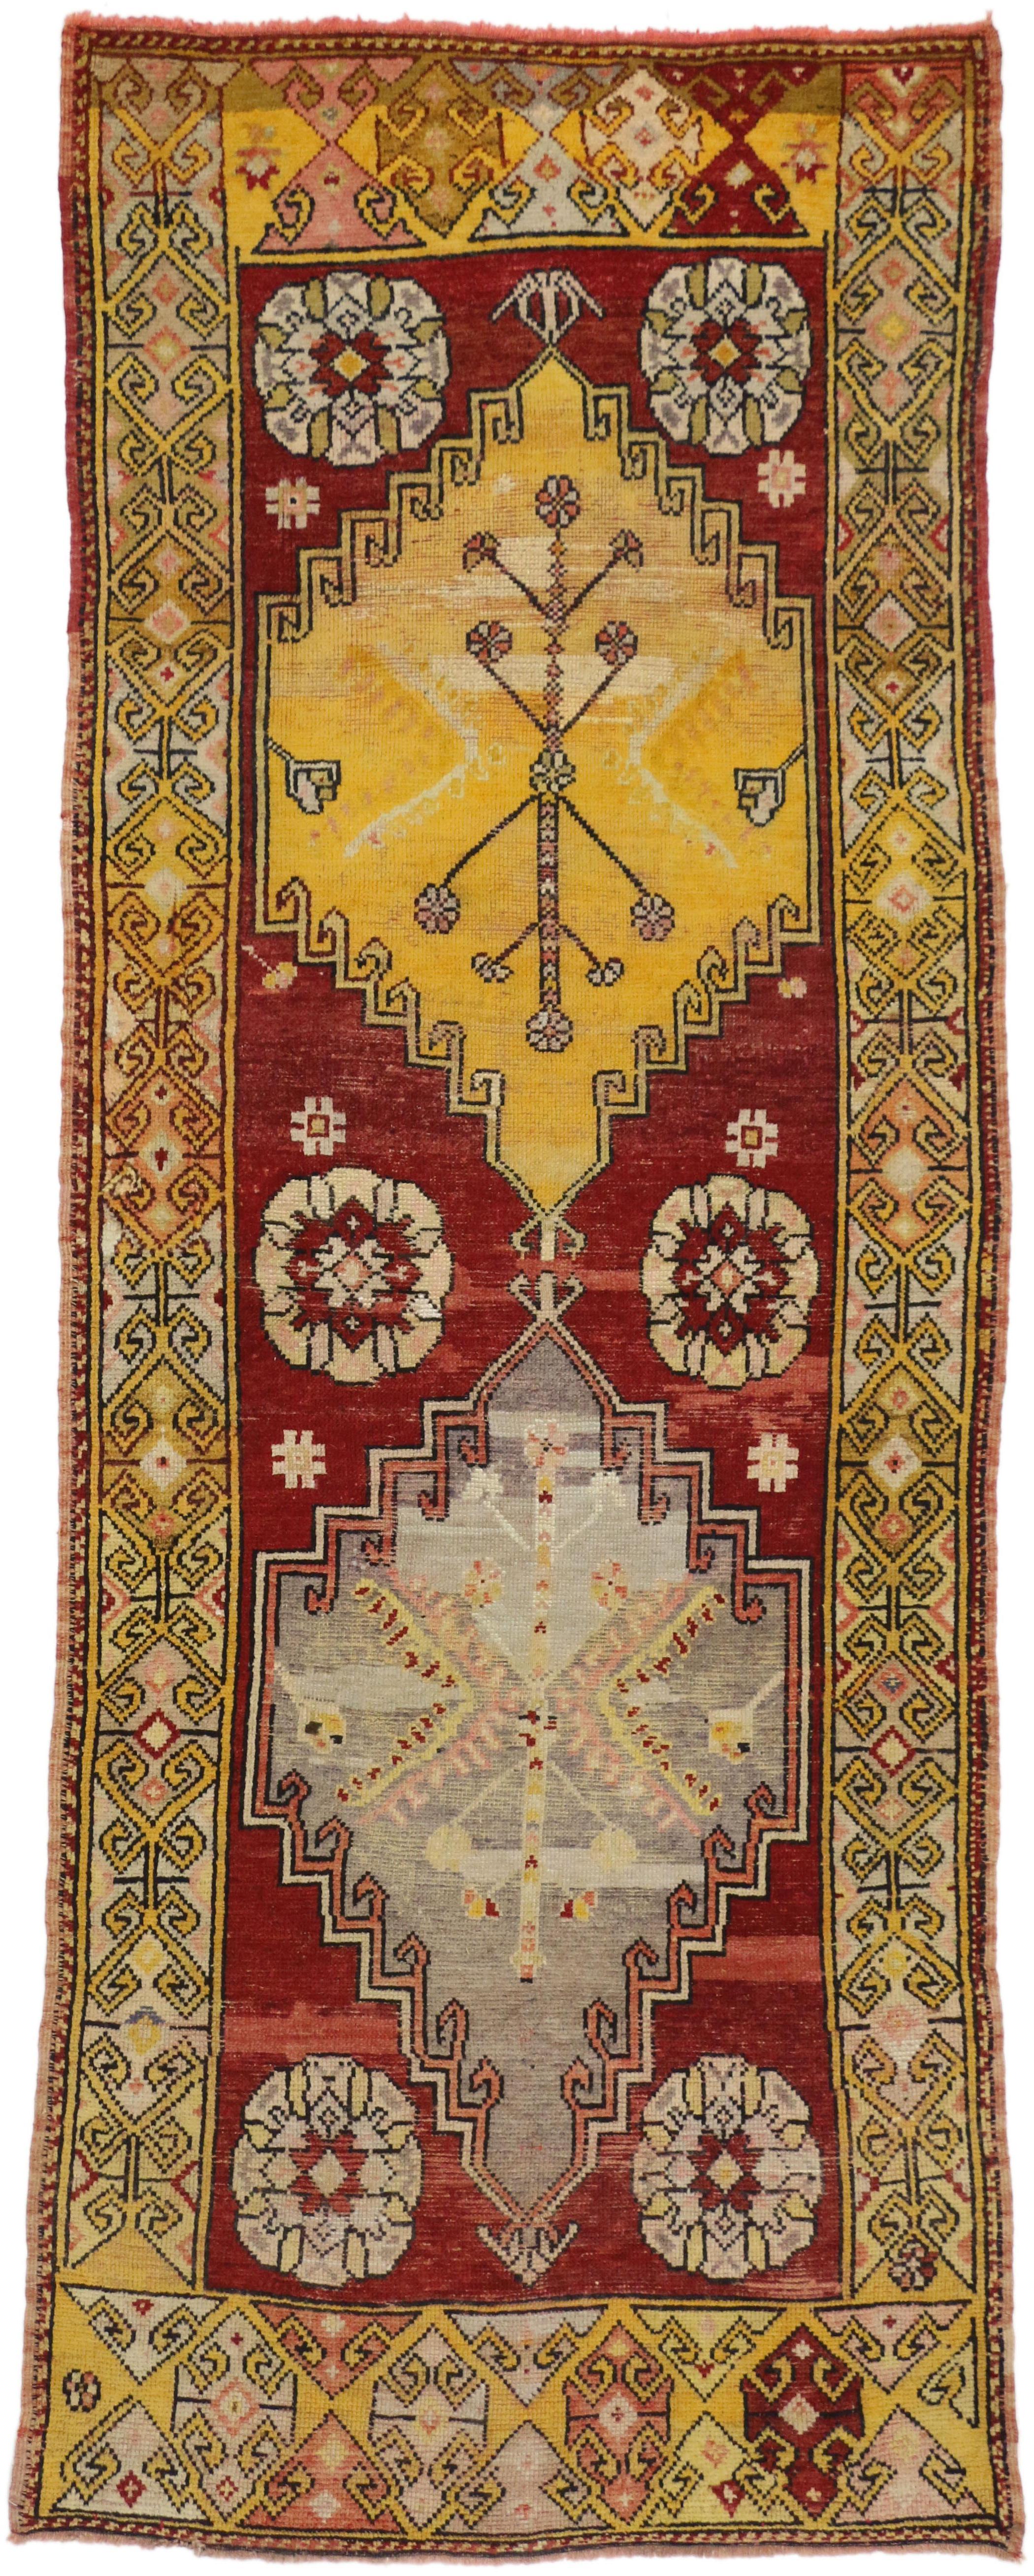 50237 Vintage Turkish Oushak Runner with Modern Tribal Style, Hallway Runner. This hand knotted wool vintage Turkish Oushak carpet runner is easily integrated into modern, contemporary decor and even those with traditional preferences. Two large